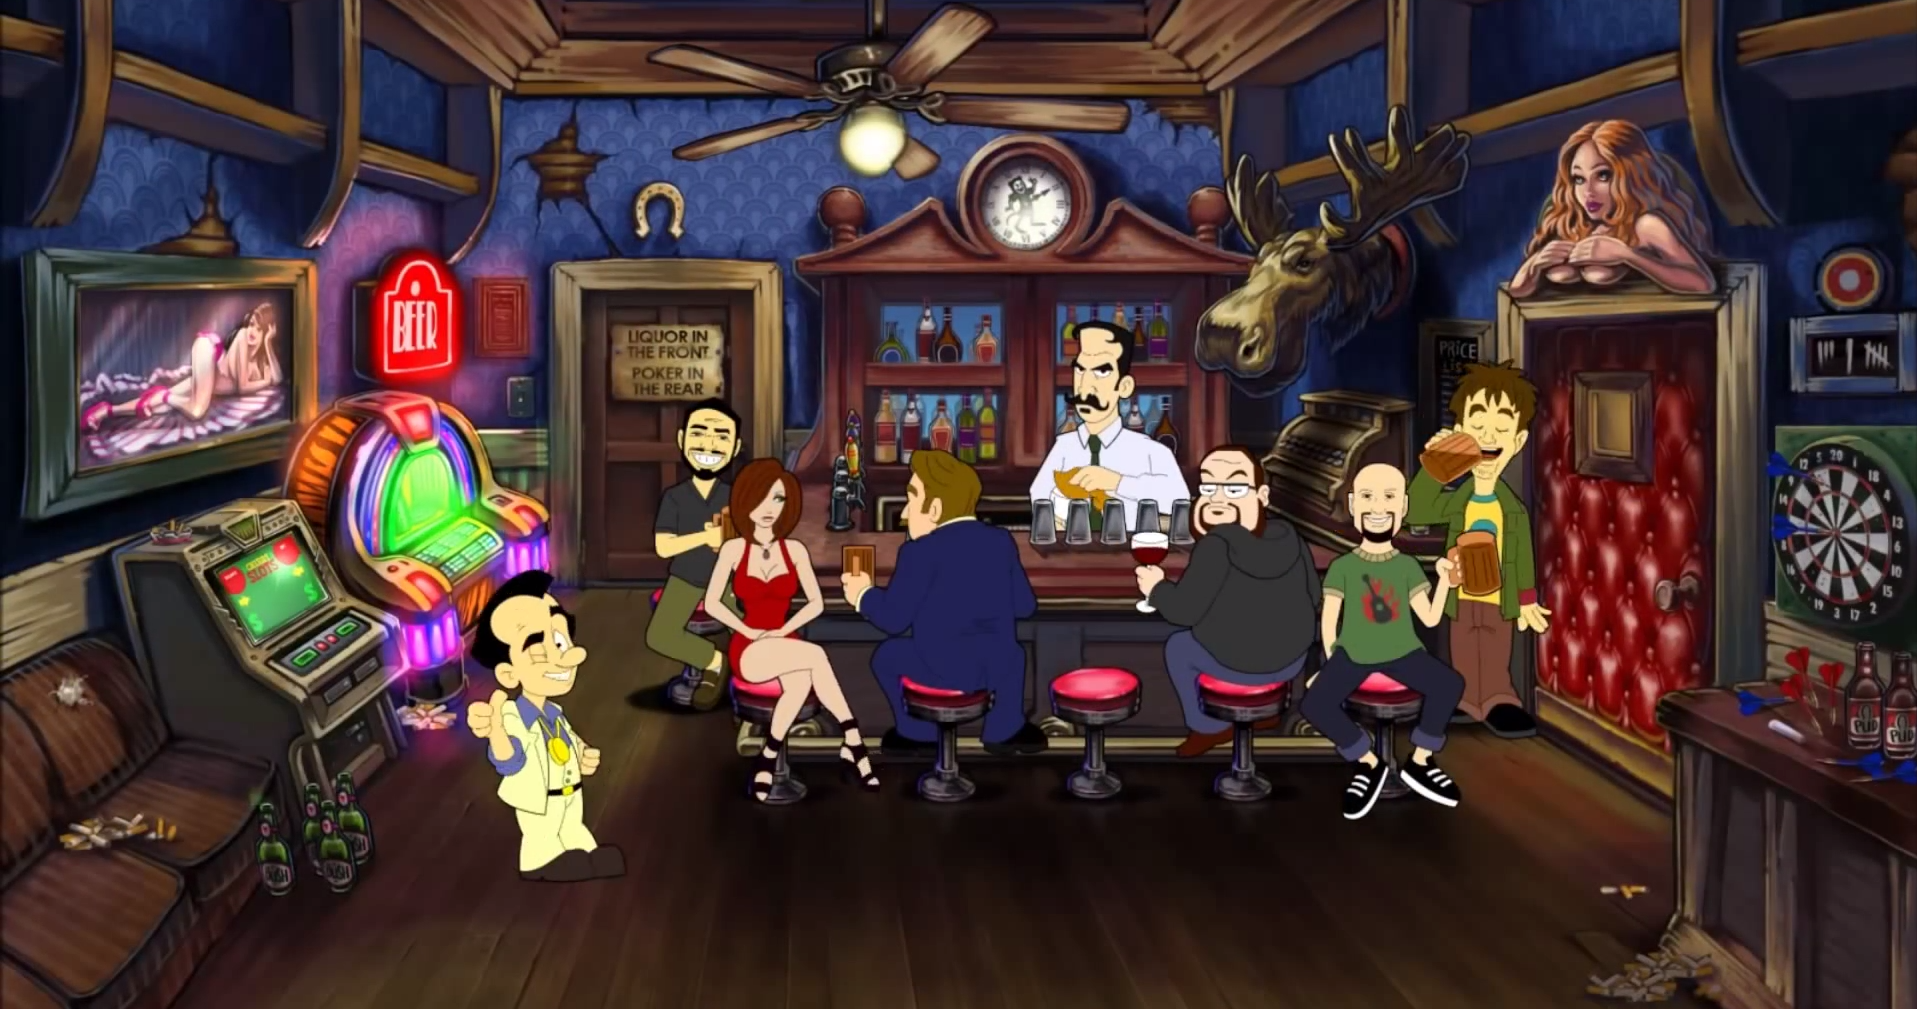 Leisure Suit Larry Publisher In Upheaval After Strange Sex Incident